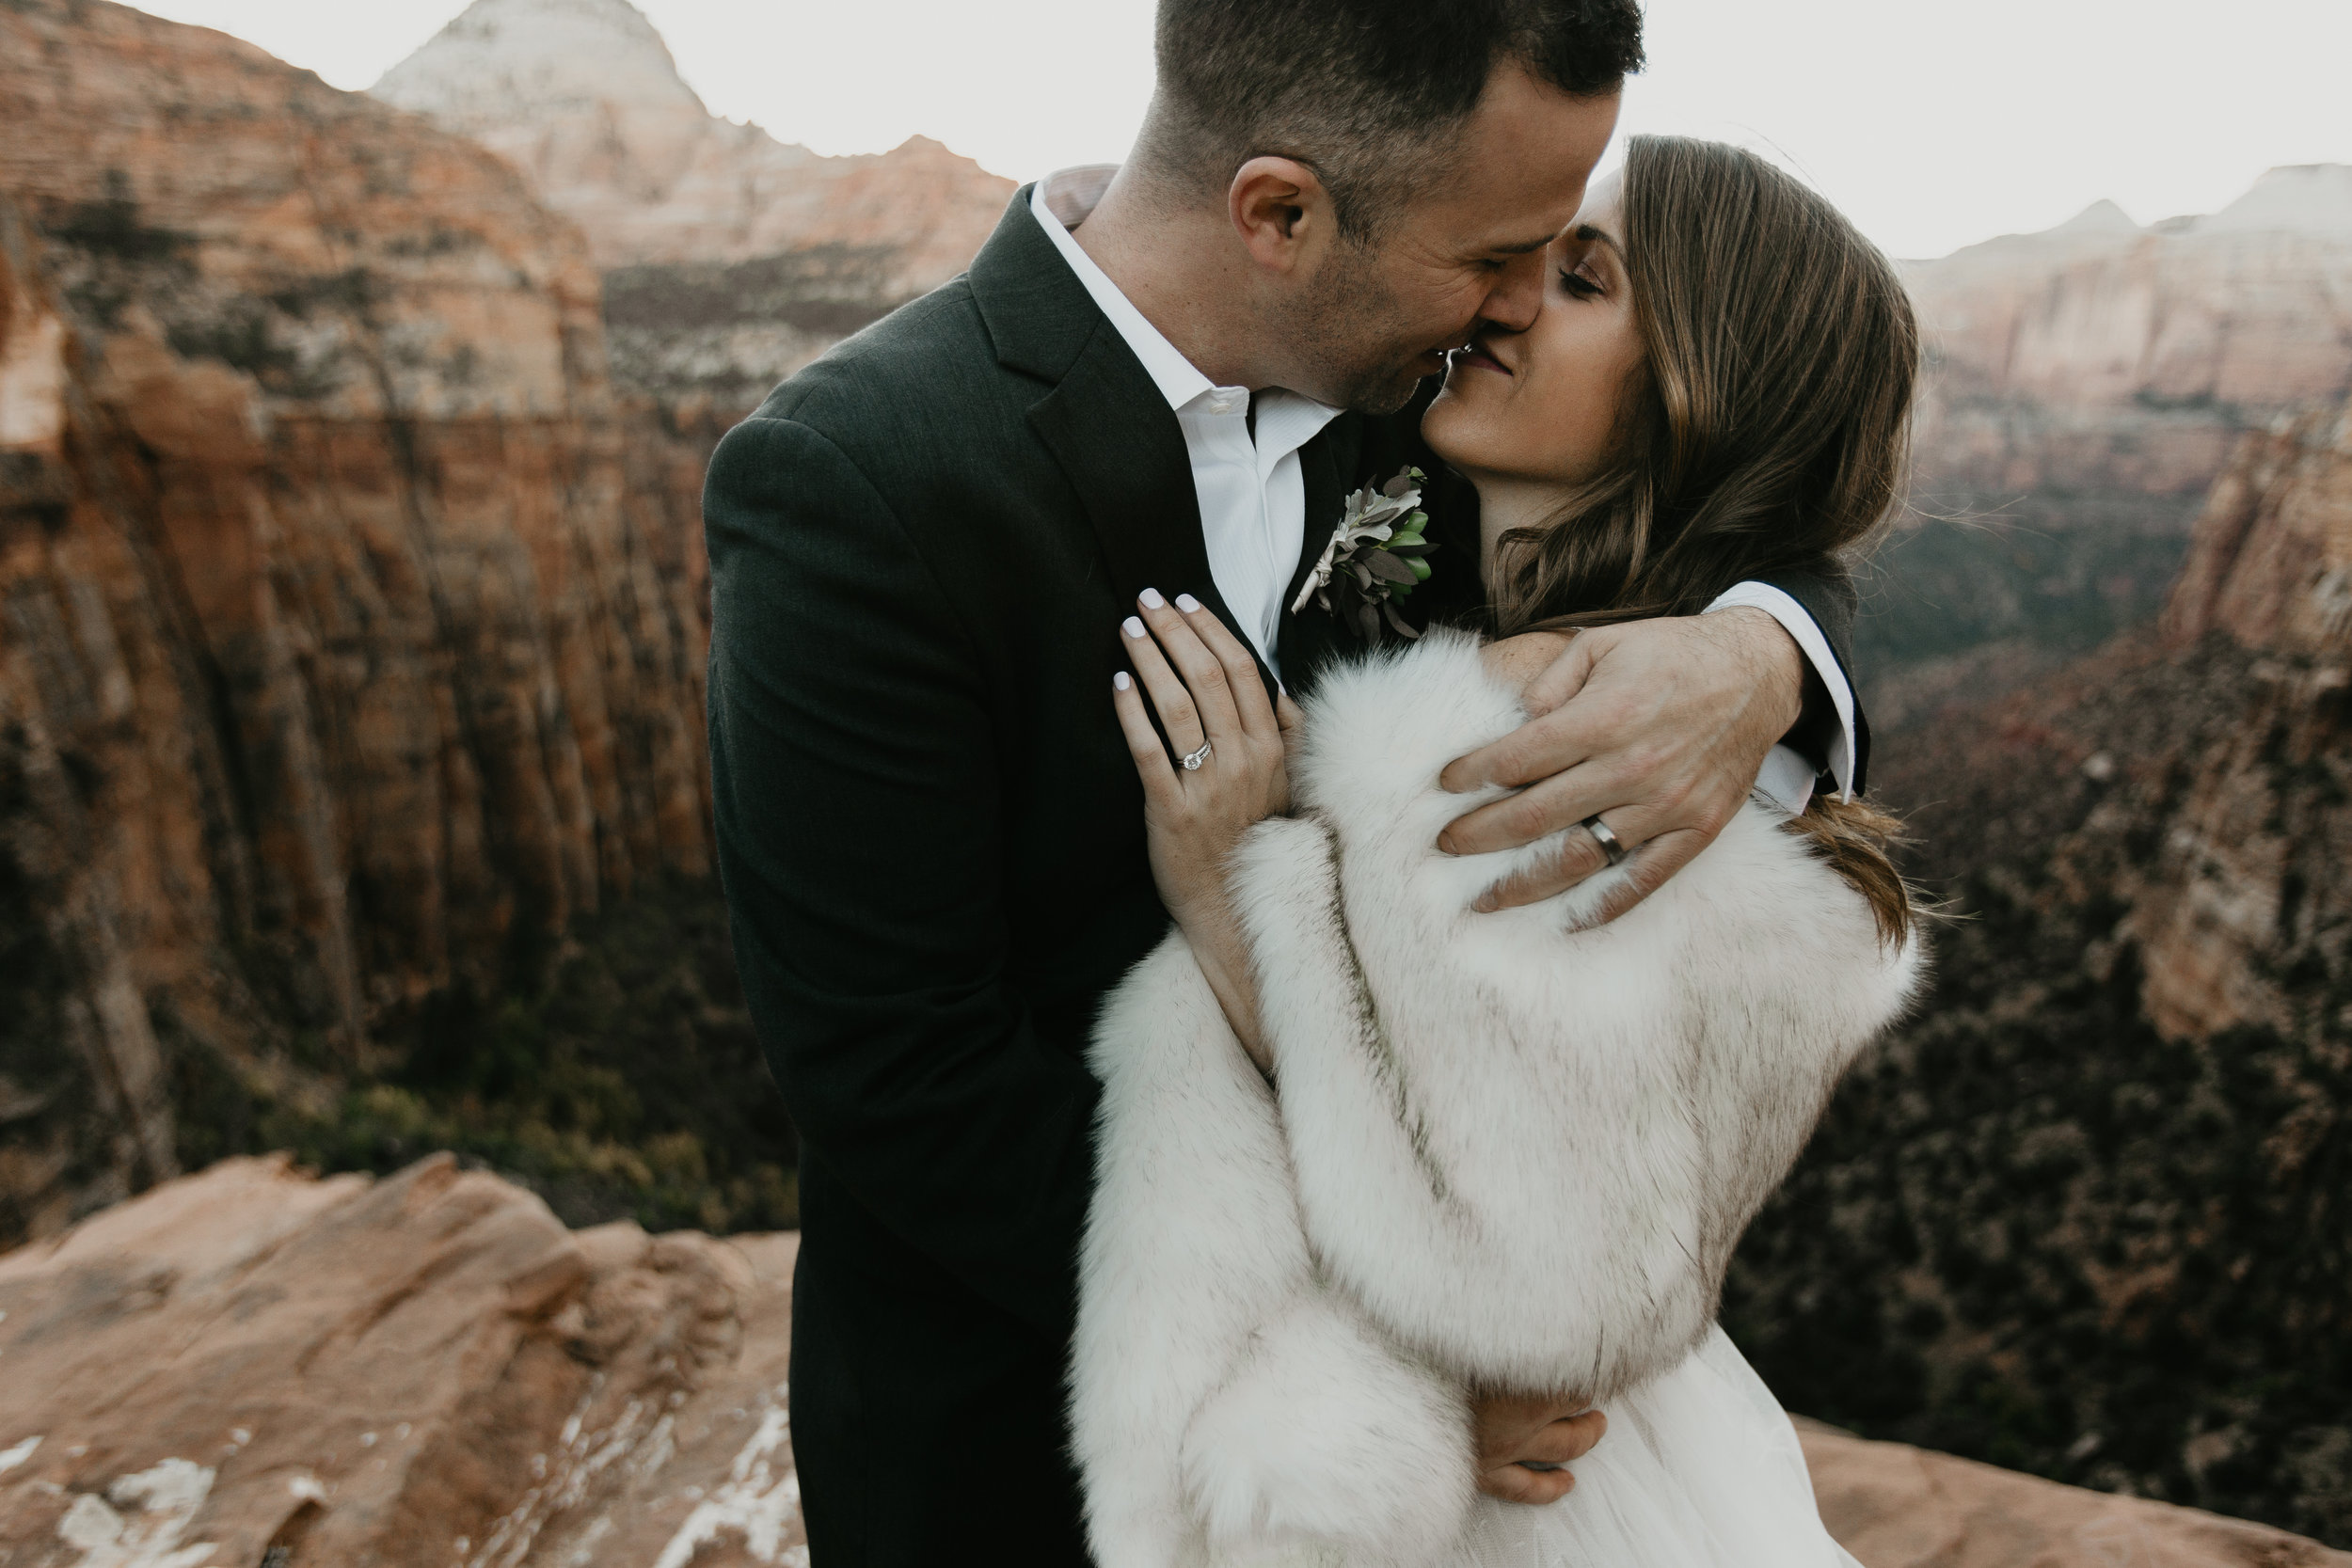 nicole-daacke-photography-zion-national-park-elopement-photographer-canyon-overlook-trail-elope-hiking-adventure-wedding-photos-fall-utah-red-rock-canyon-stgeorge-eloping-photographer-69.jpg